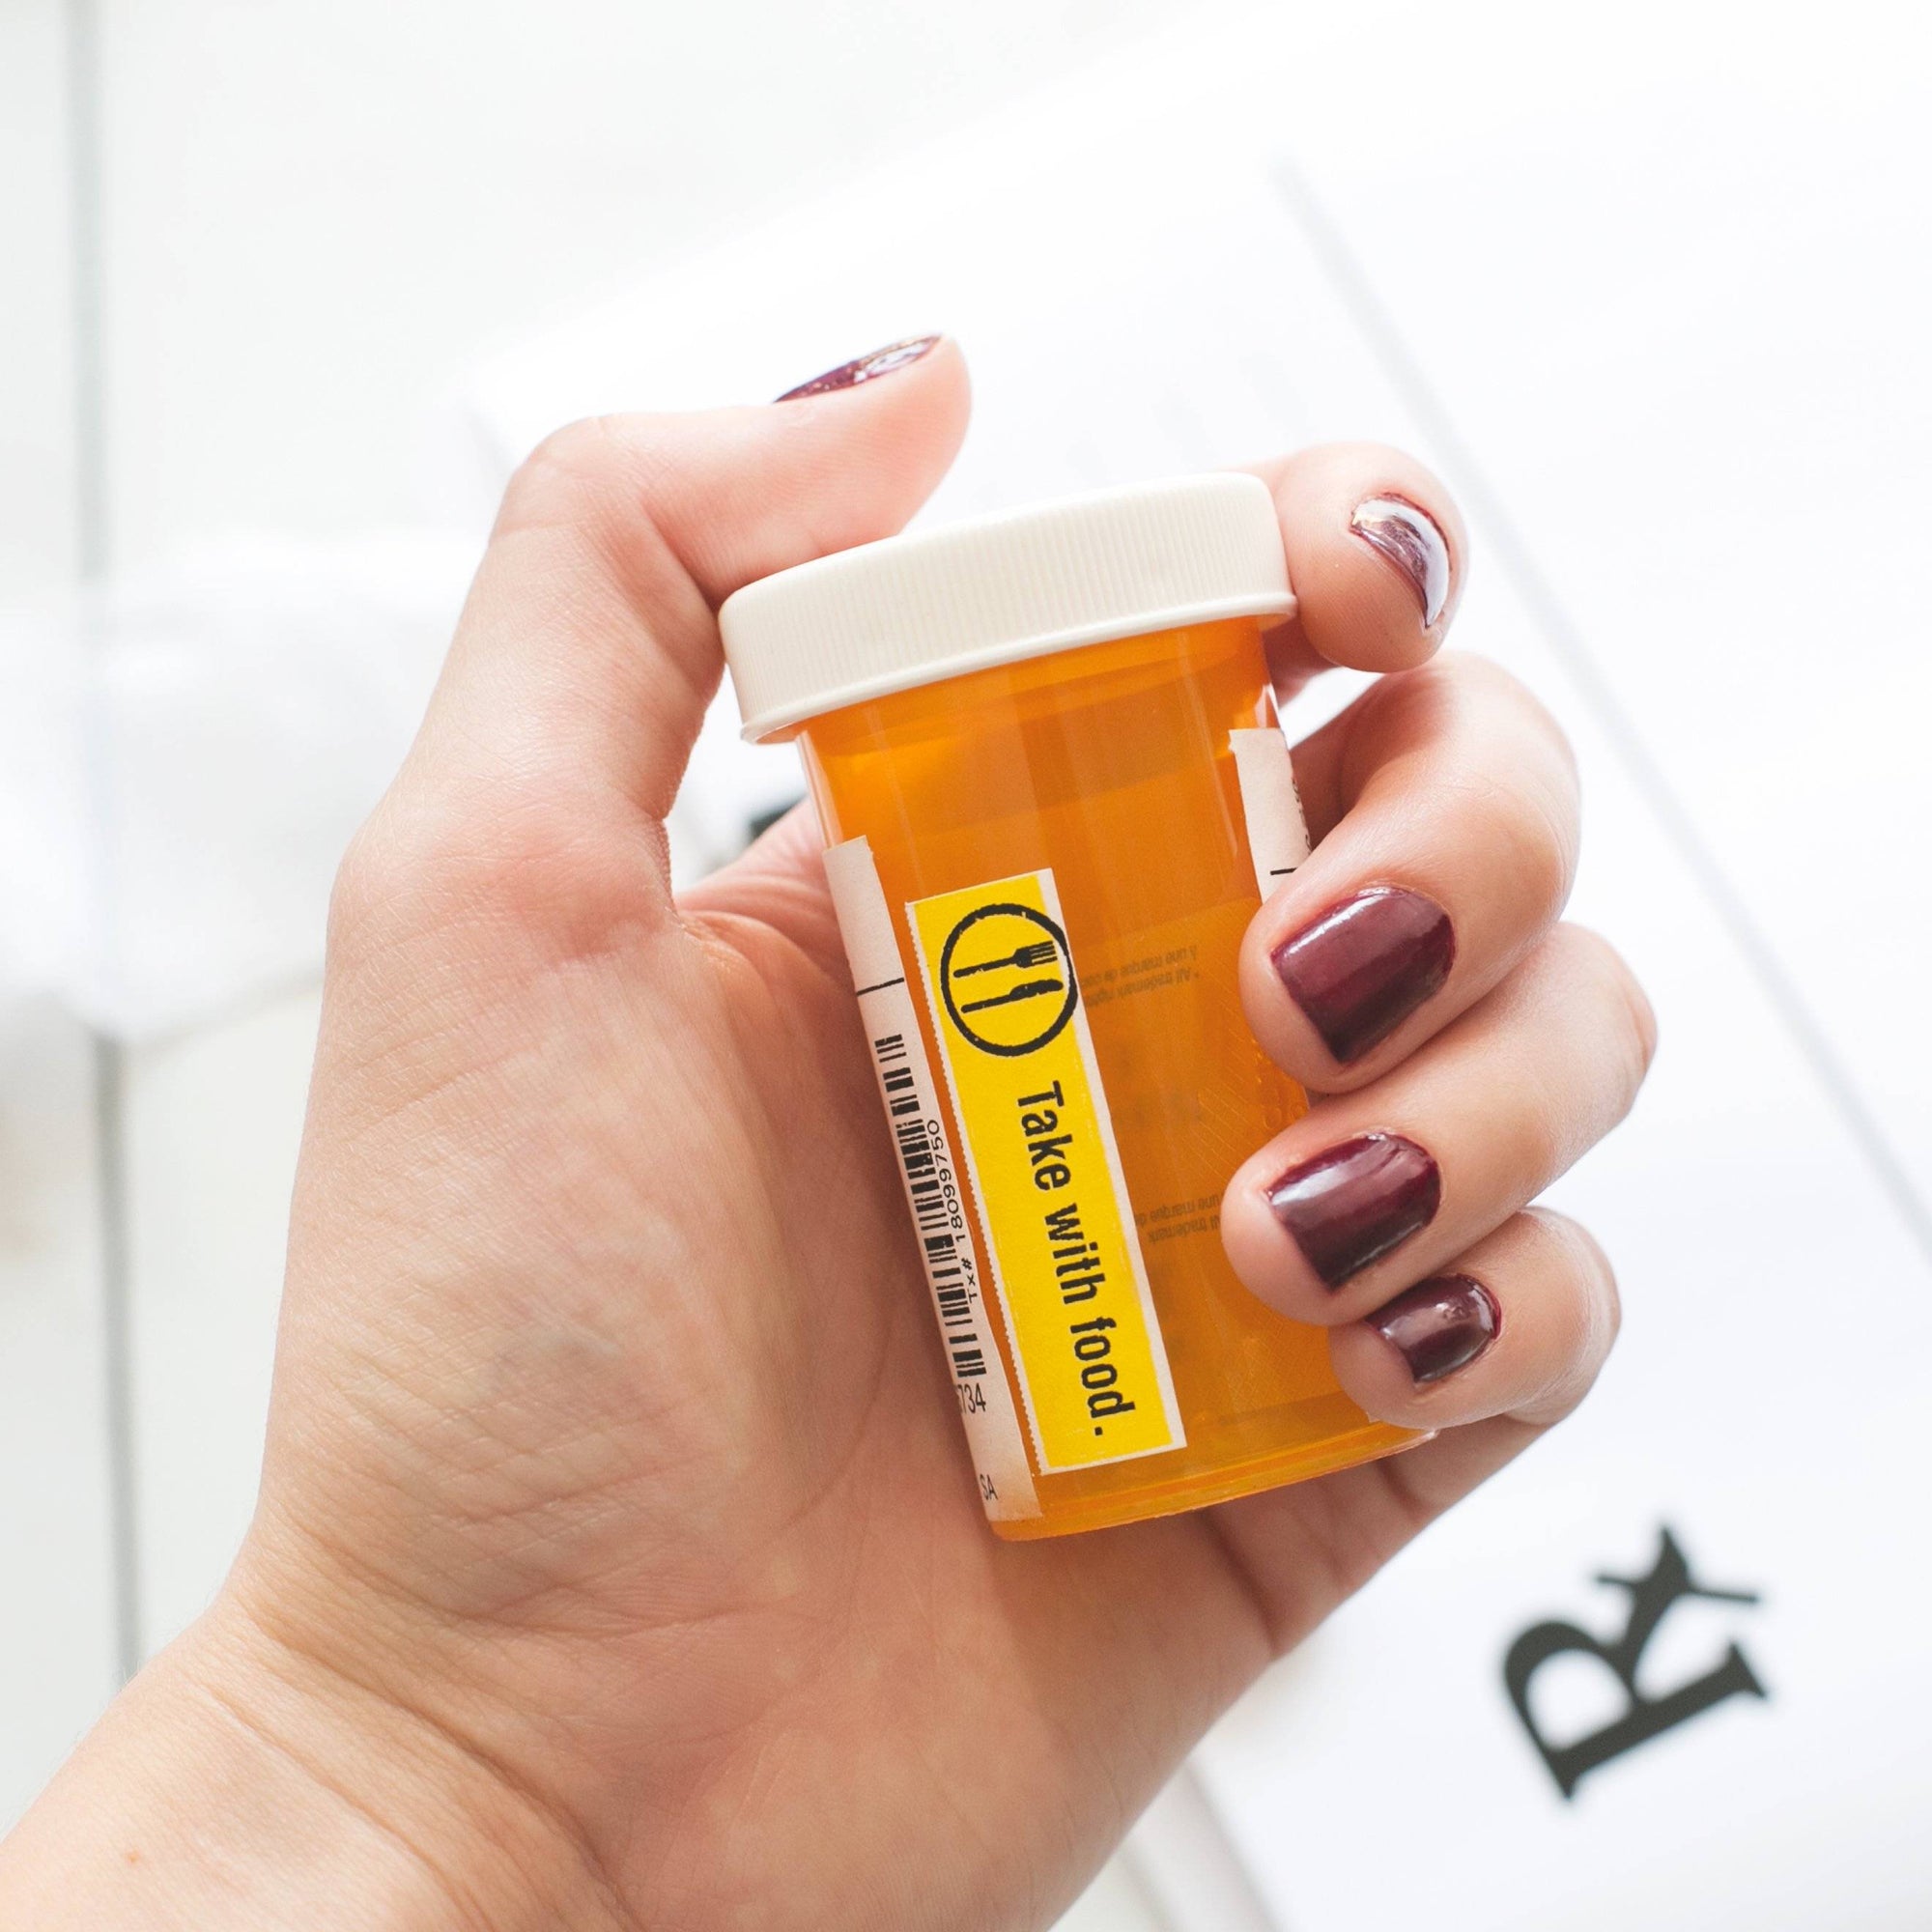 Refill your medication easily using our online portal. Transfer your medication easily with the portal. Prescription refill does not need to be difficult. Talk to our pharmacist if you have any questions about how to get a prescription refill.